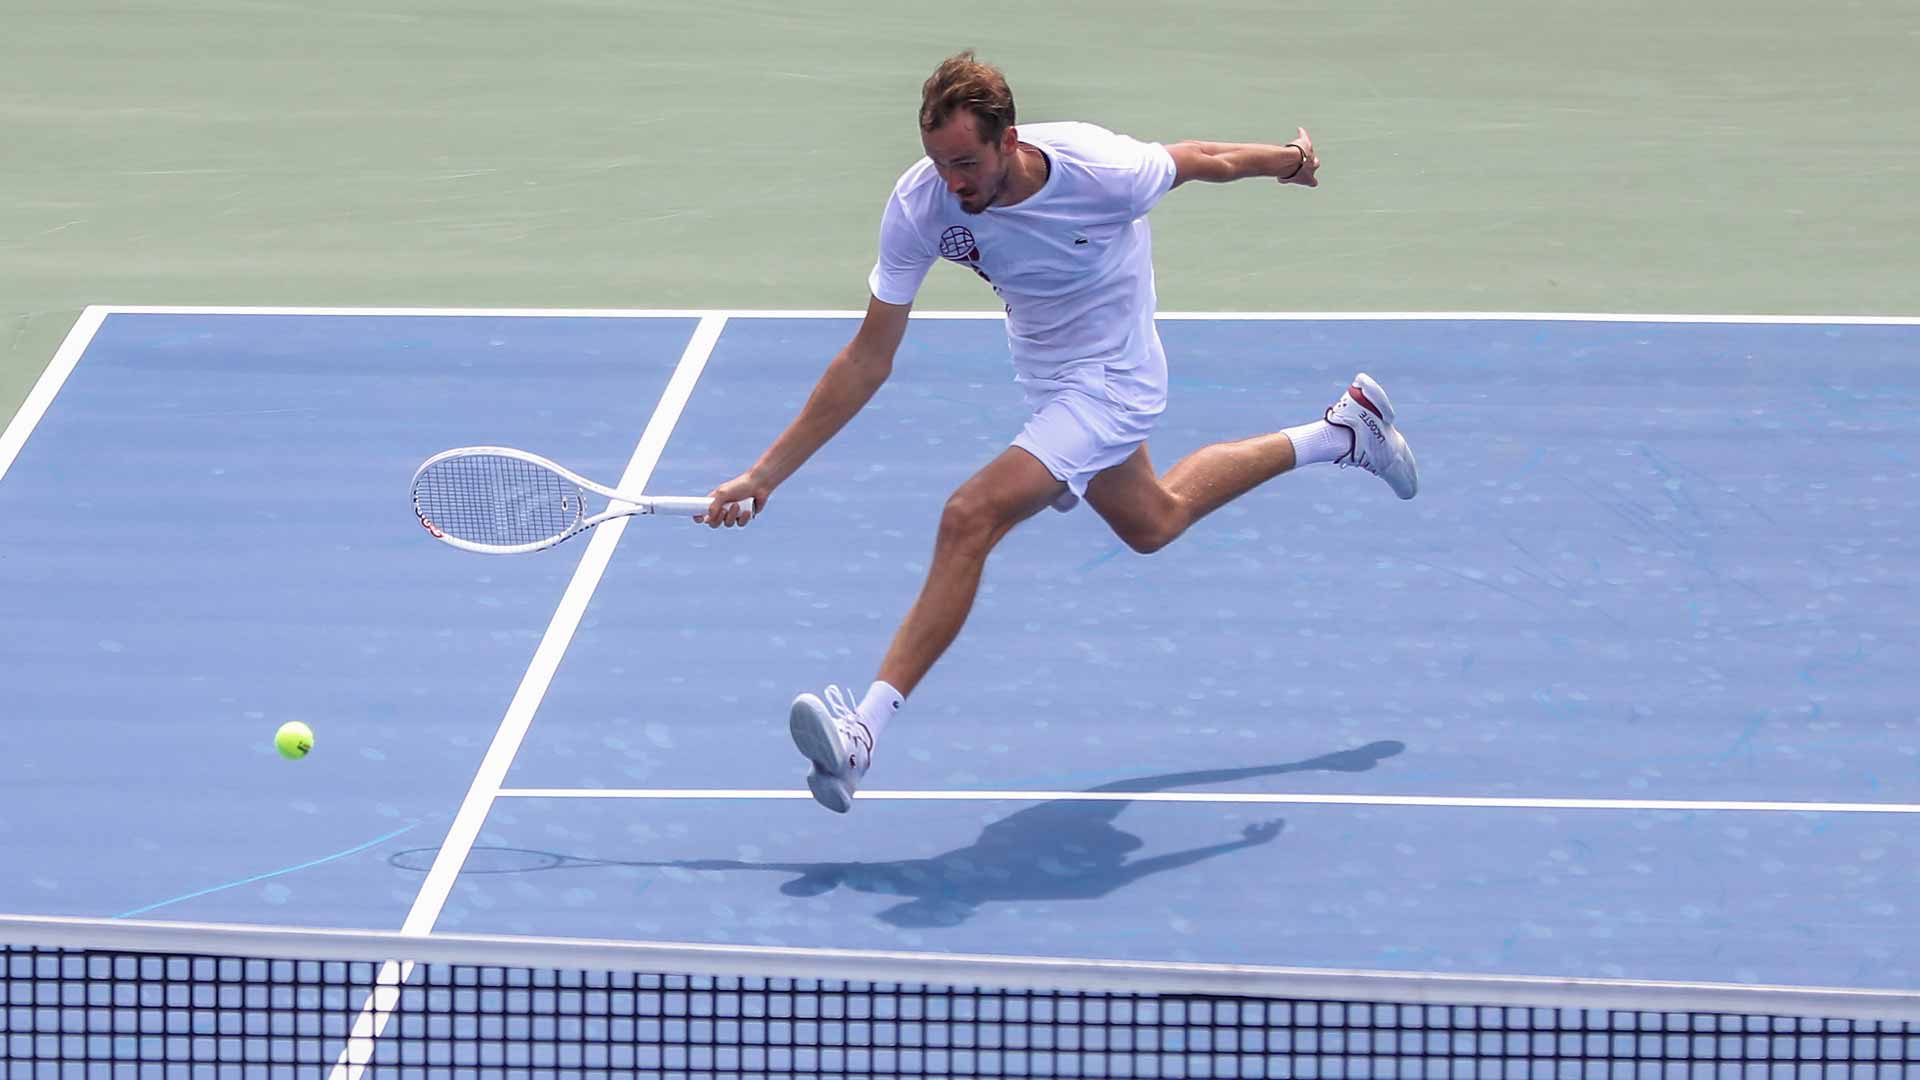 Daniil Medvedev, who is the second seed this year, won the Toronto title in 2021.